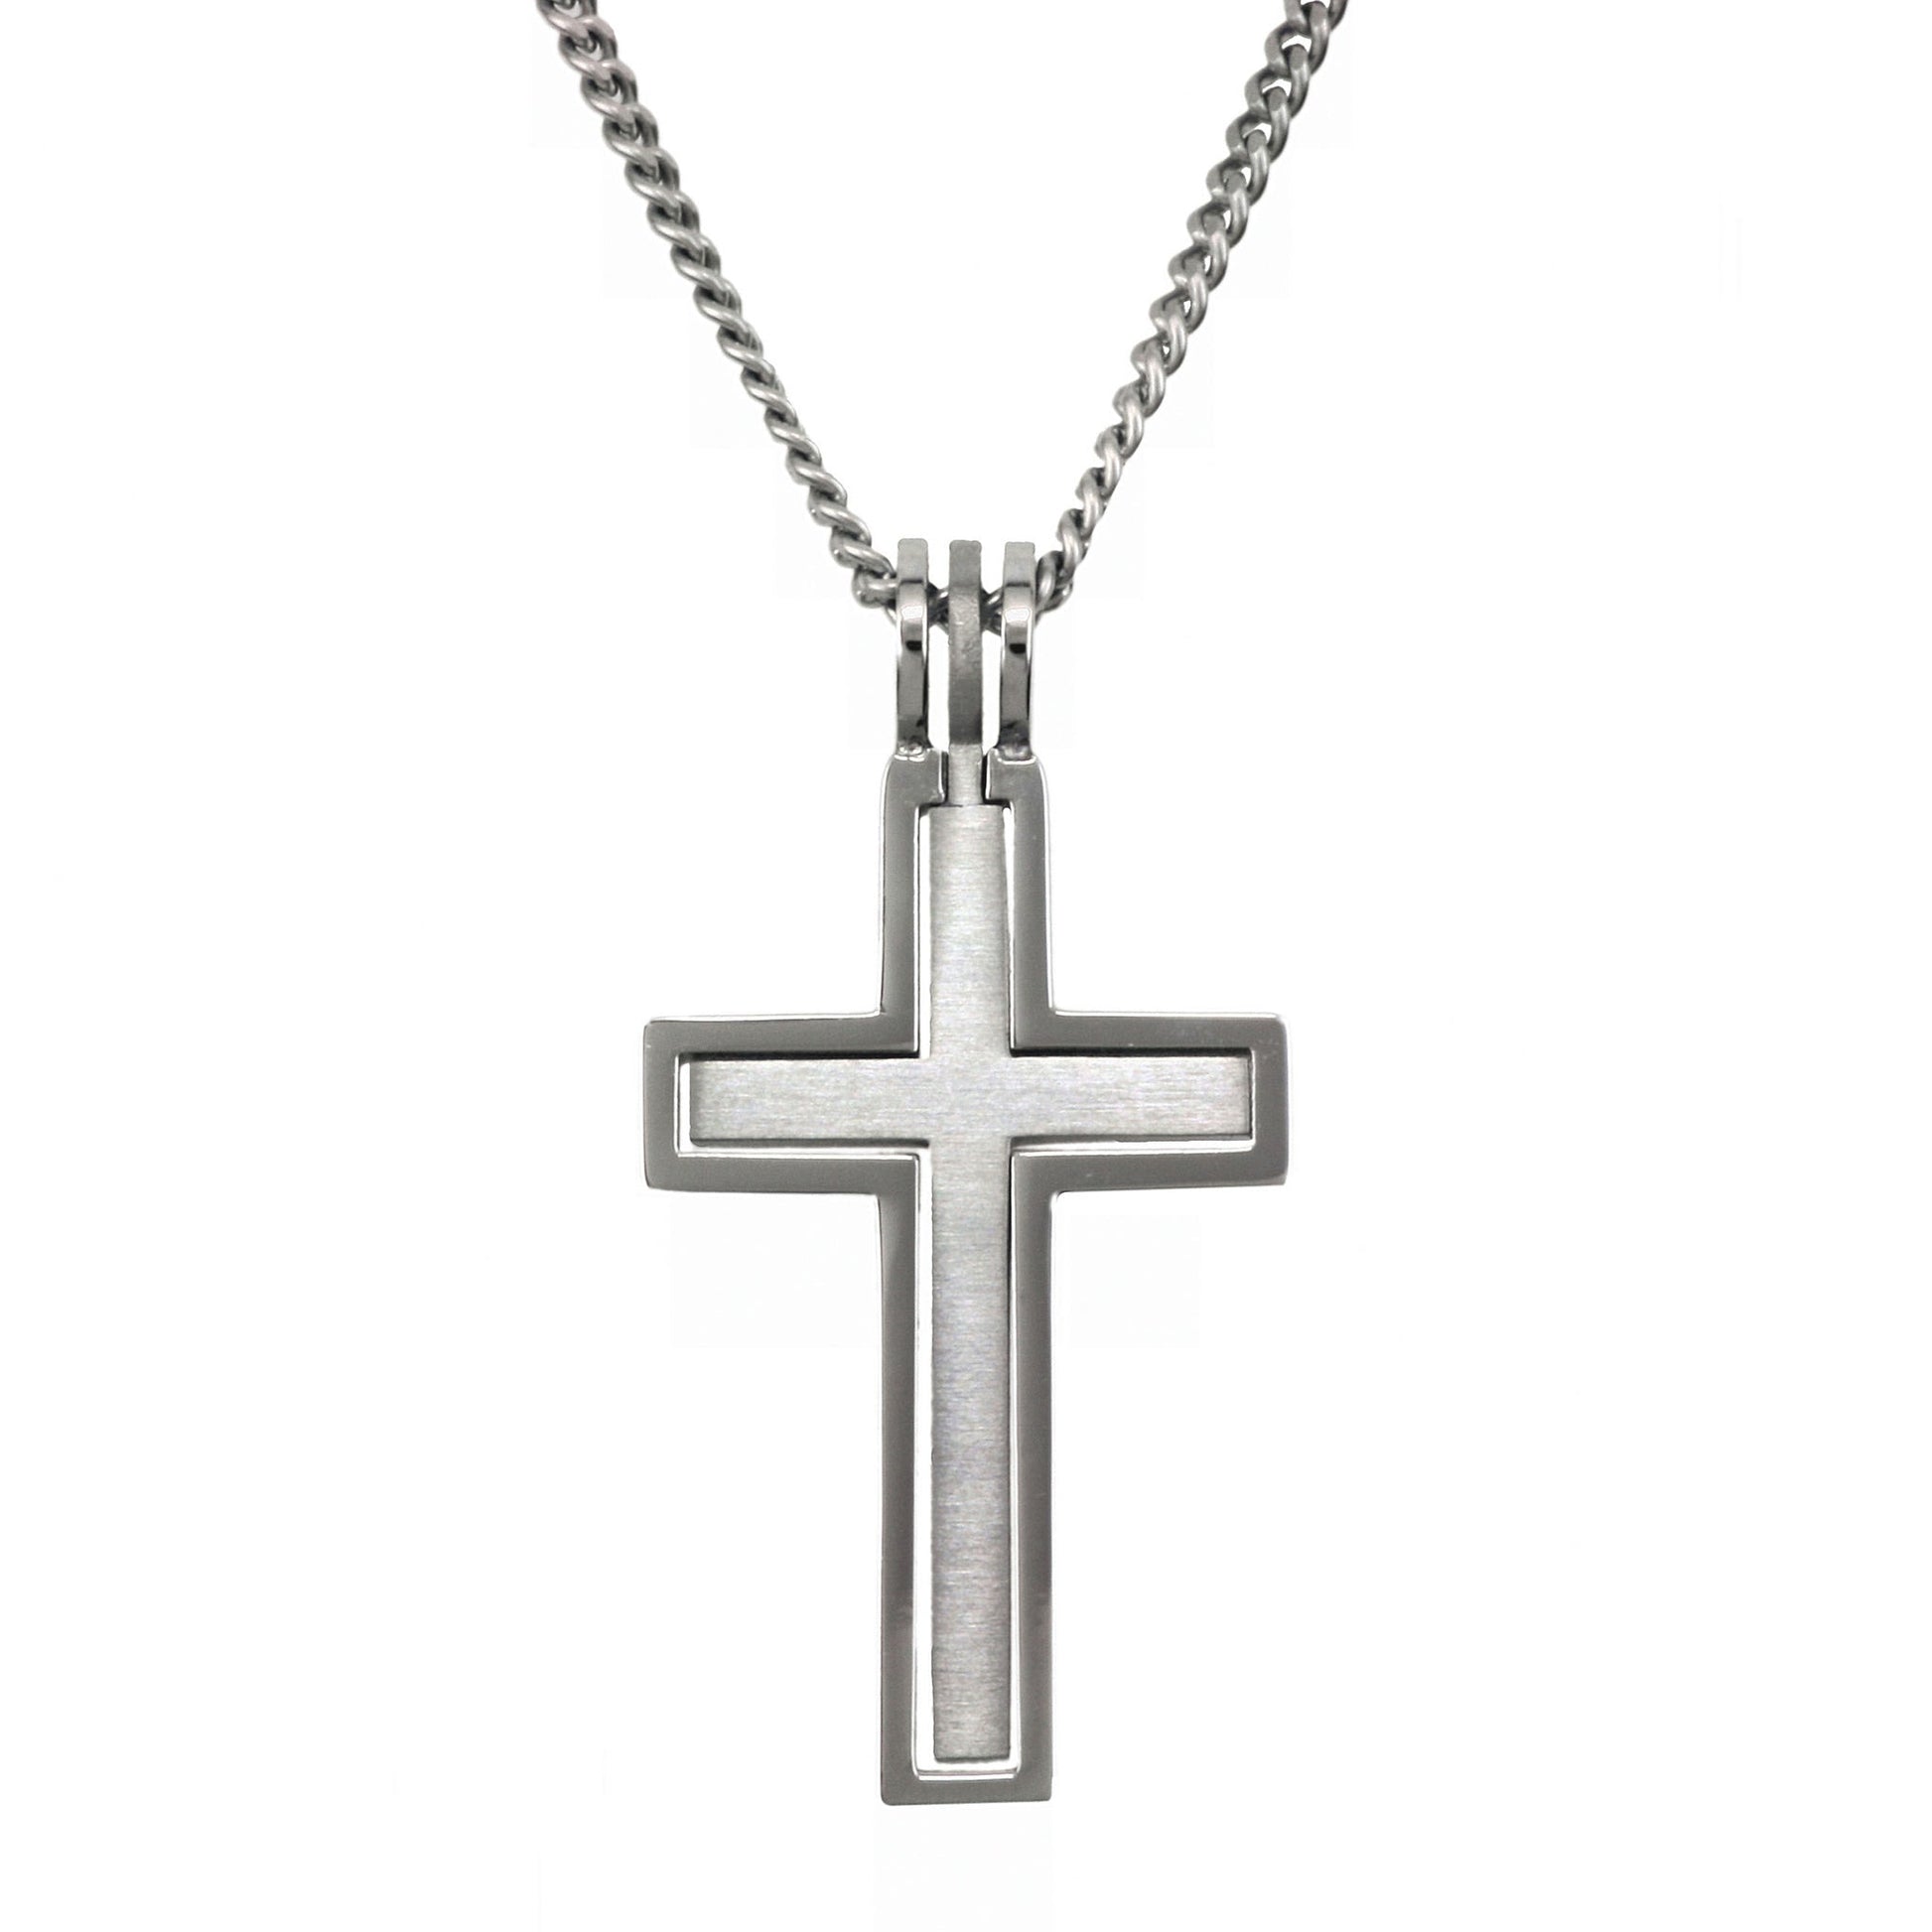 A stainless steel florentine cross necklace on 24" chain displayed on a neutral white background.